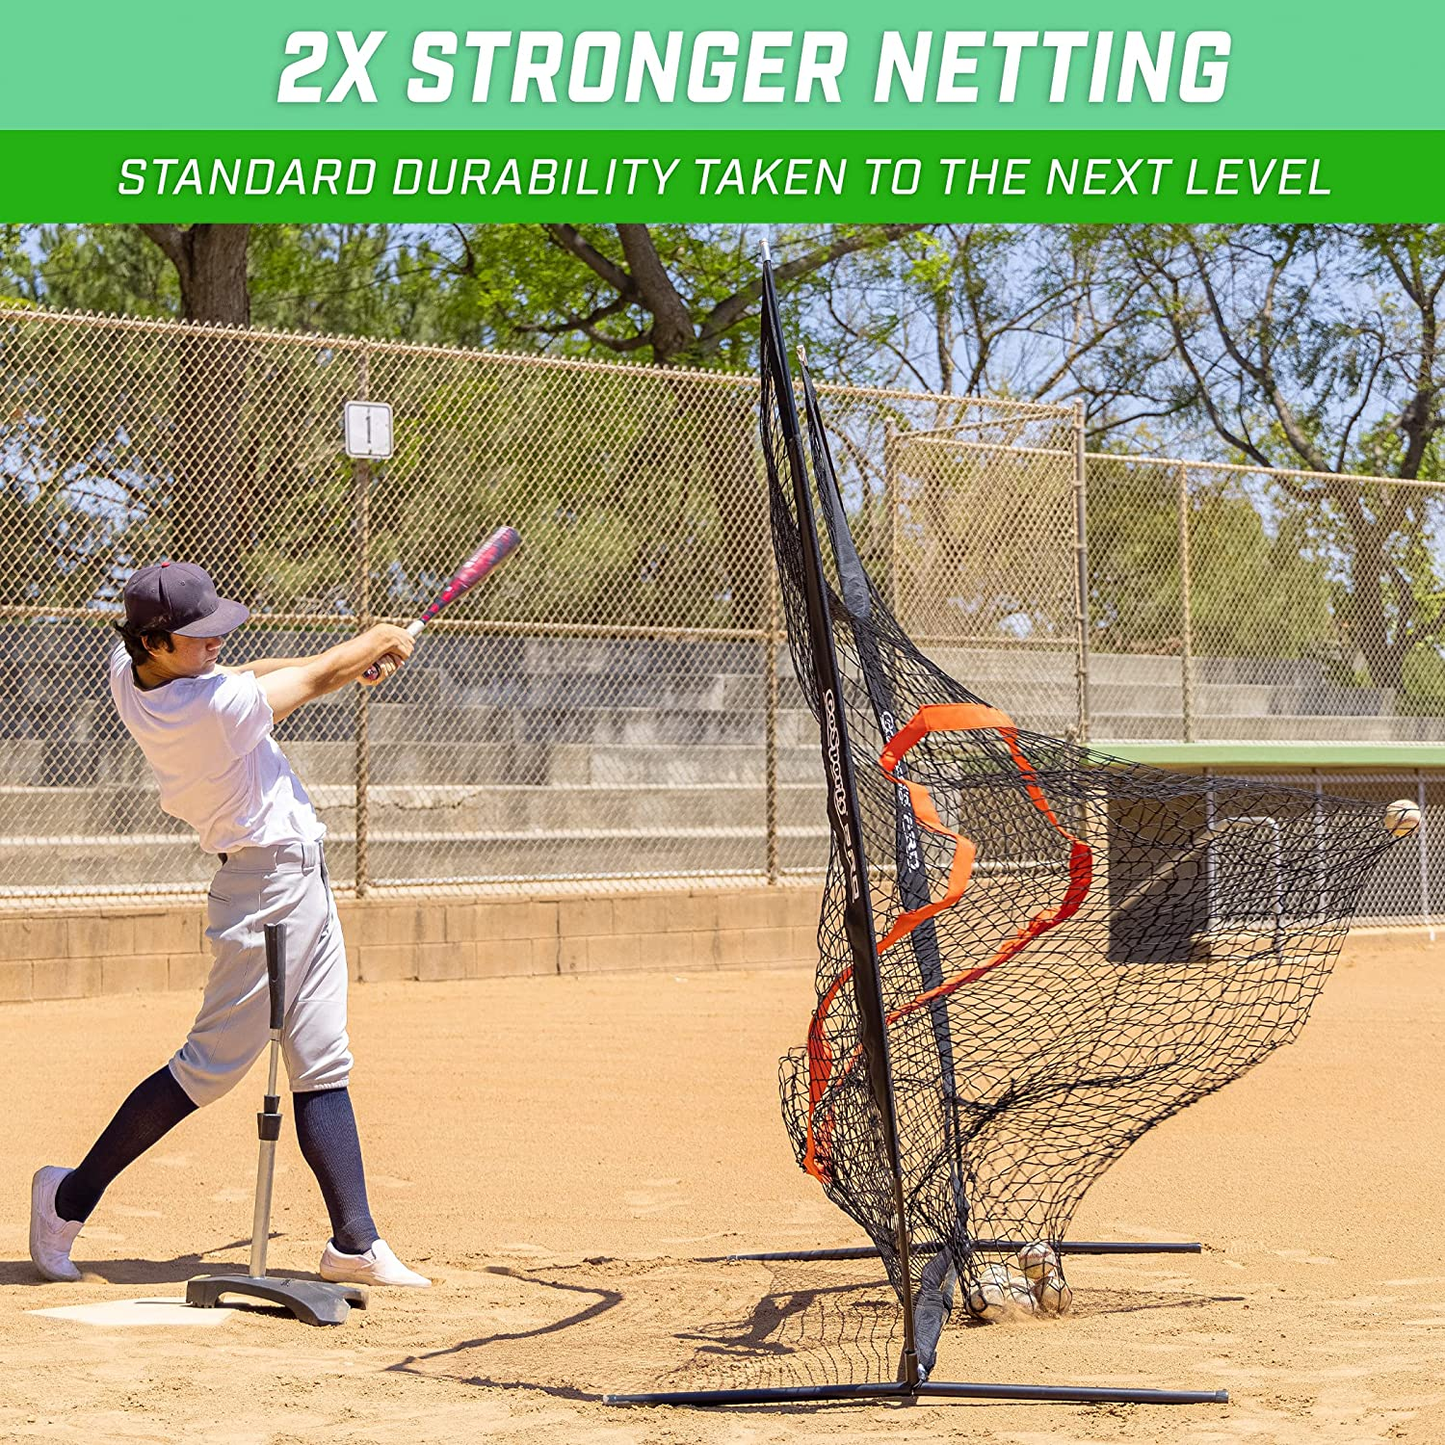 7'X7' Baseball & Softball Practice Hitting & Pitching Net with Bow Frame, Carry Bag and Bonus Strike Zone, Great for All Skill Levels